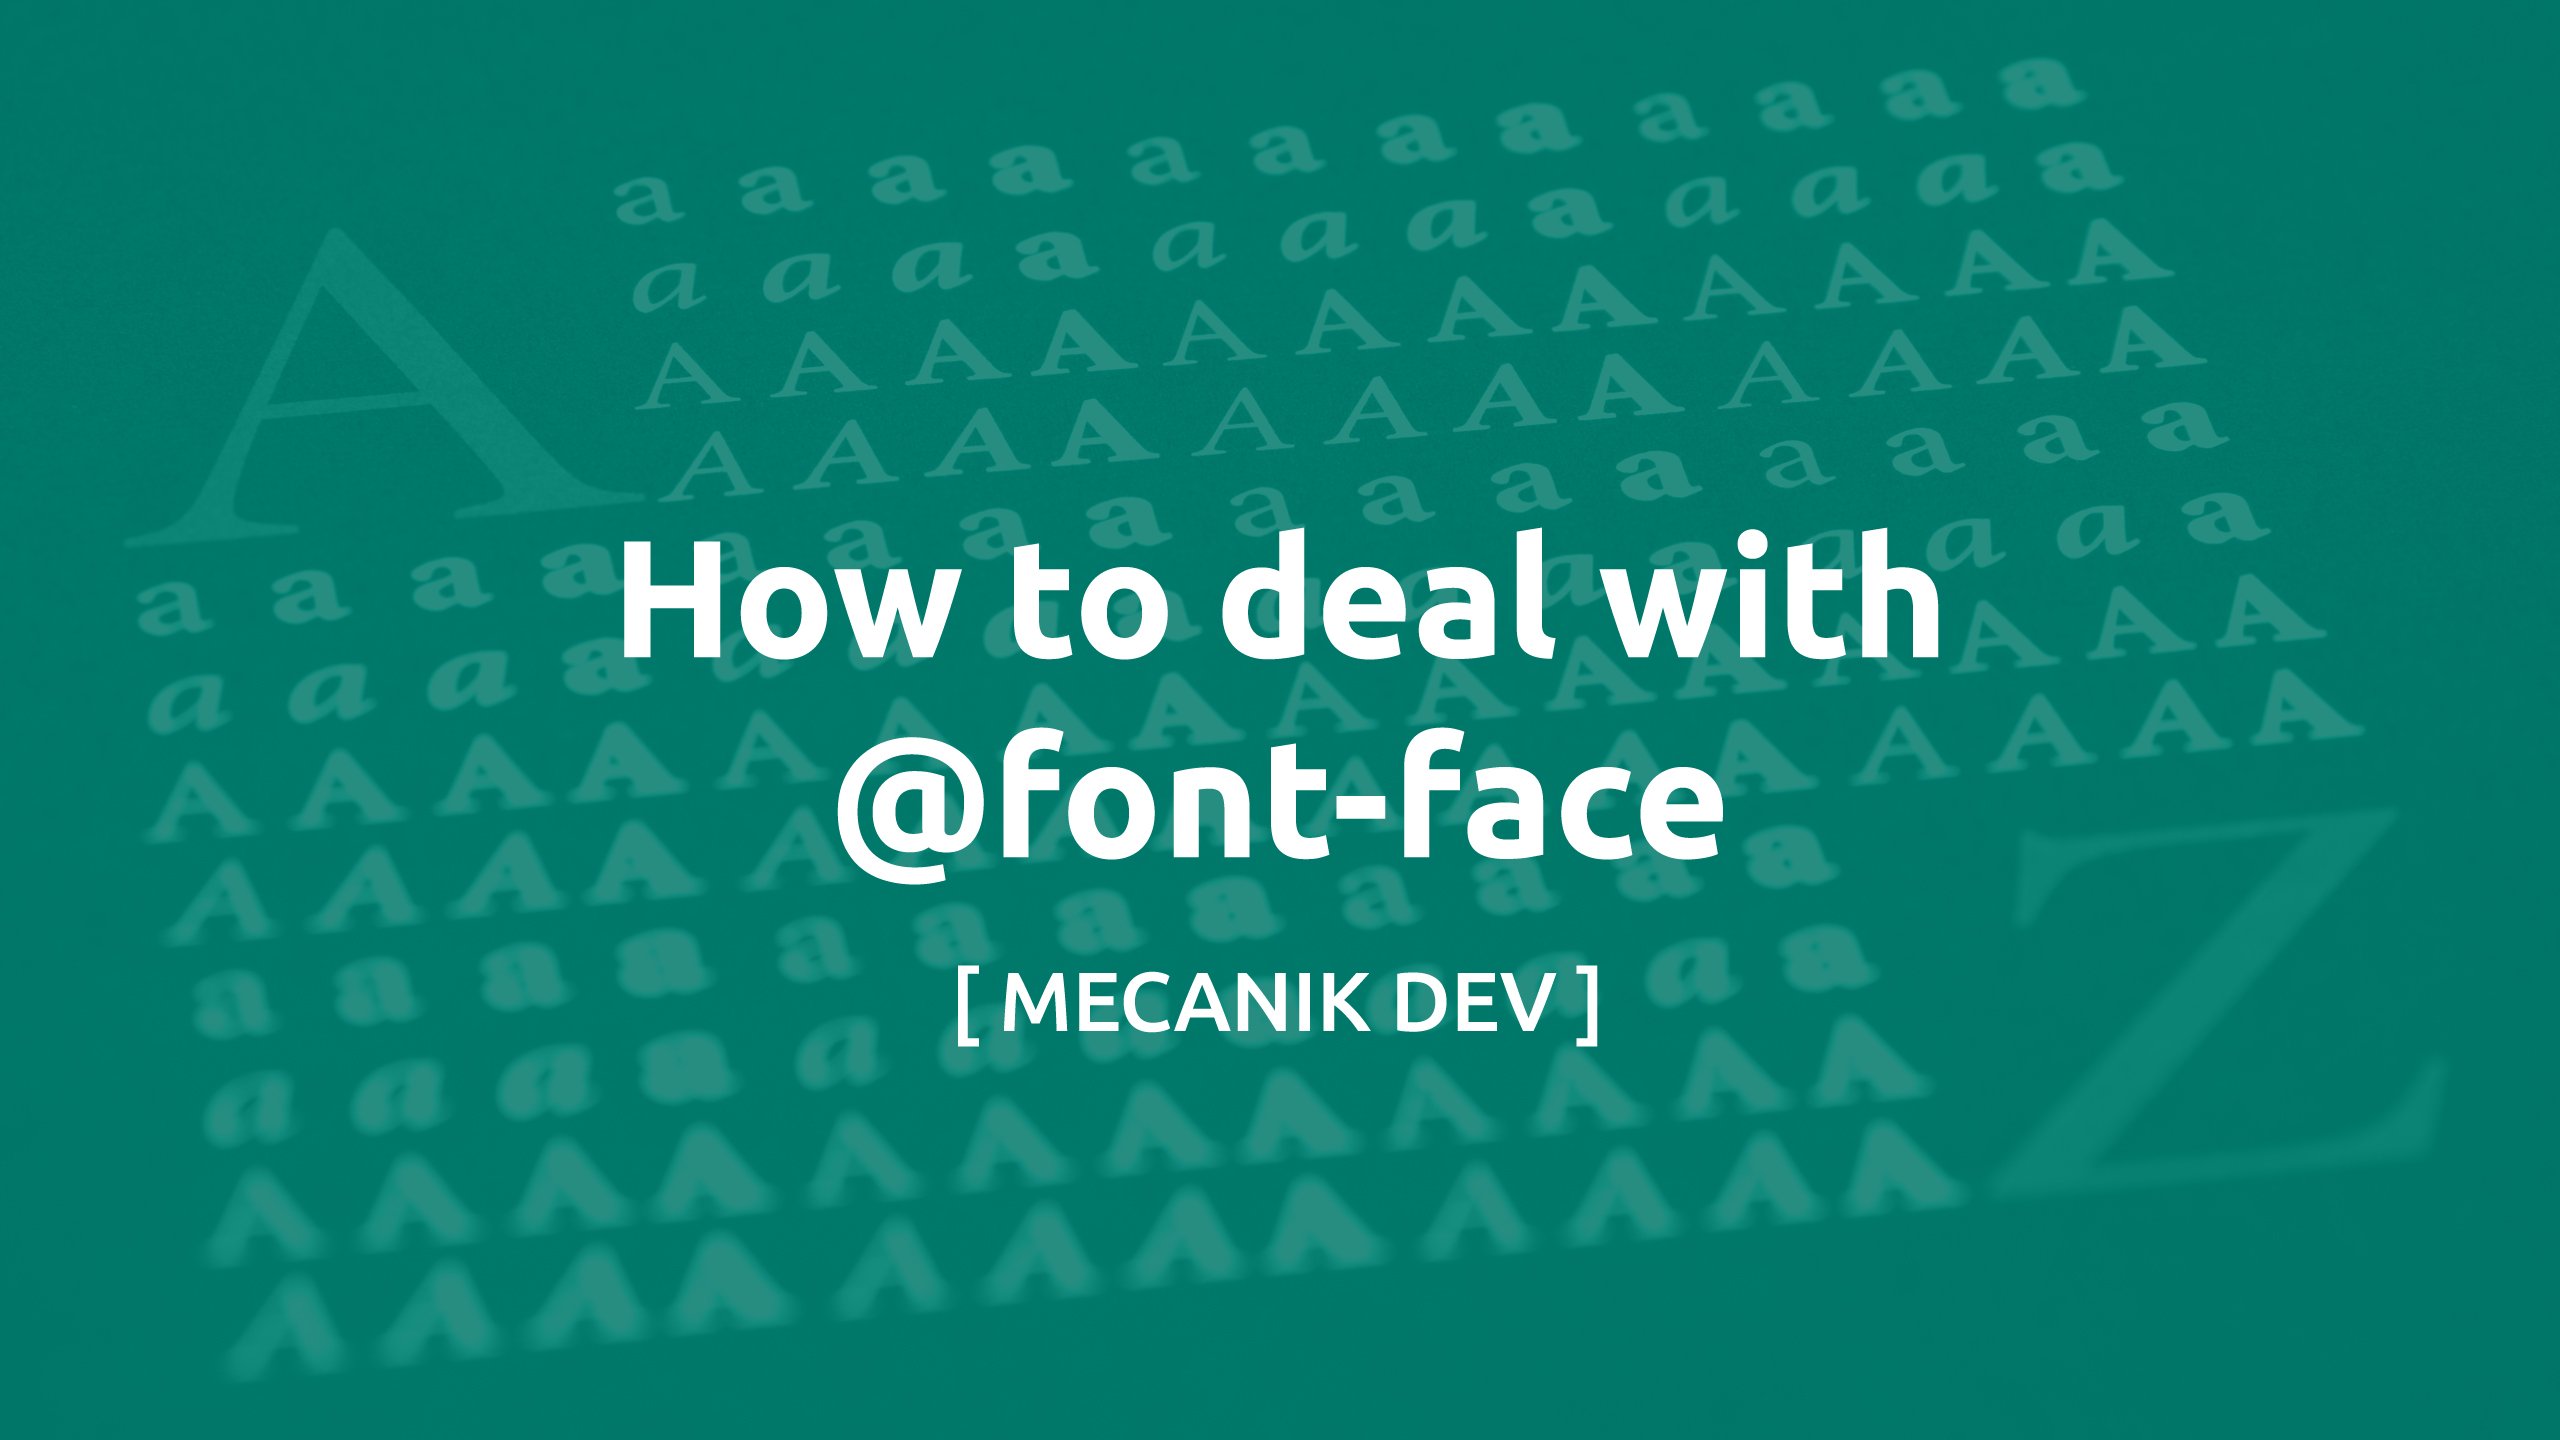 How to deal with @font-face